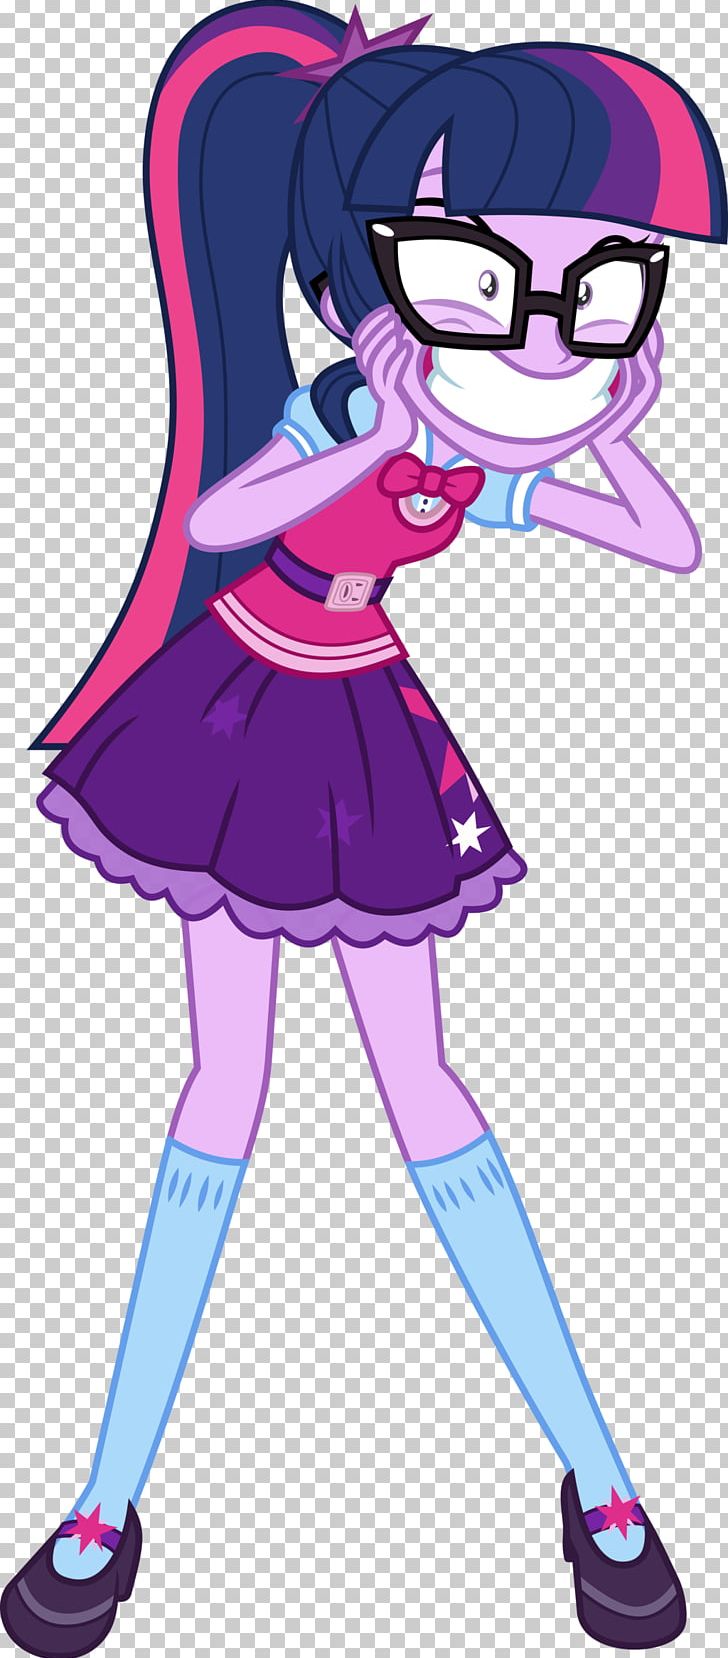 Twilight Sparkle Sunset Shimmer Rarity My Little Pony: Equestria Girls PNG, Clipart, Black Hair, Cartoon, Deviantart, Fictional Character, Girl Free PNG Download